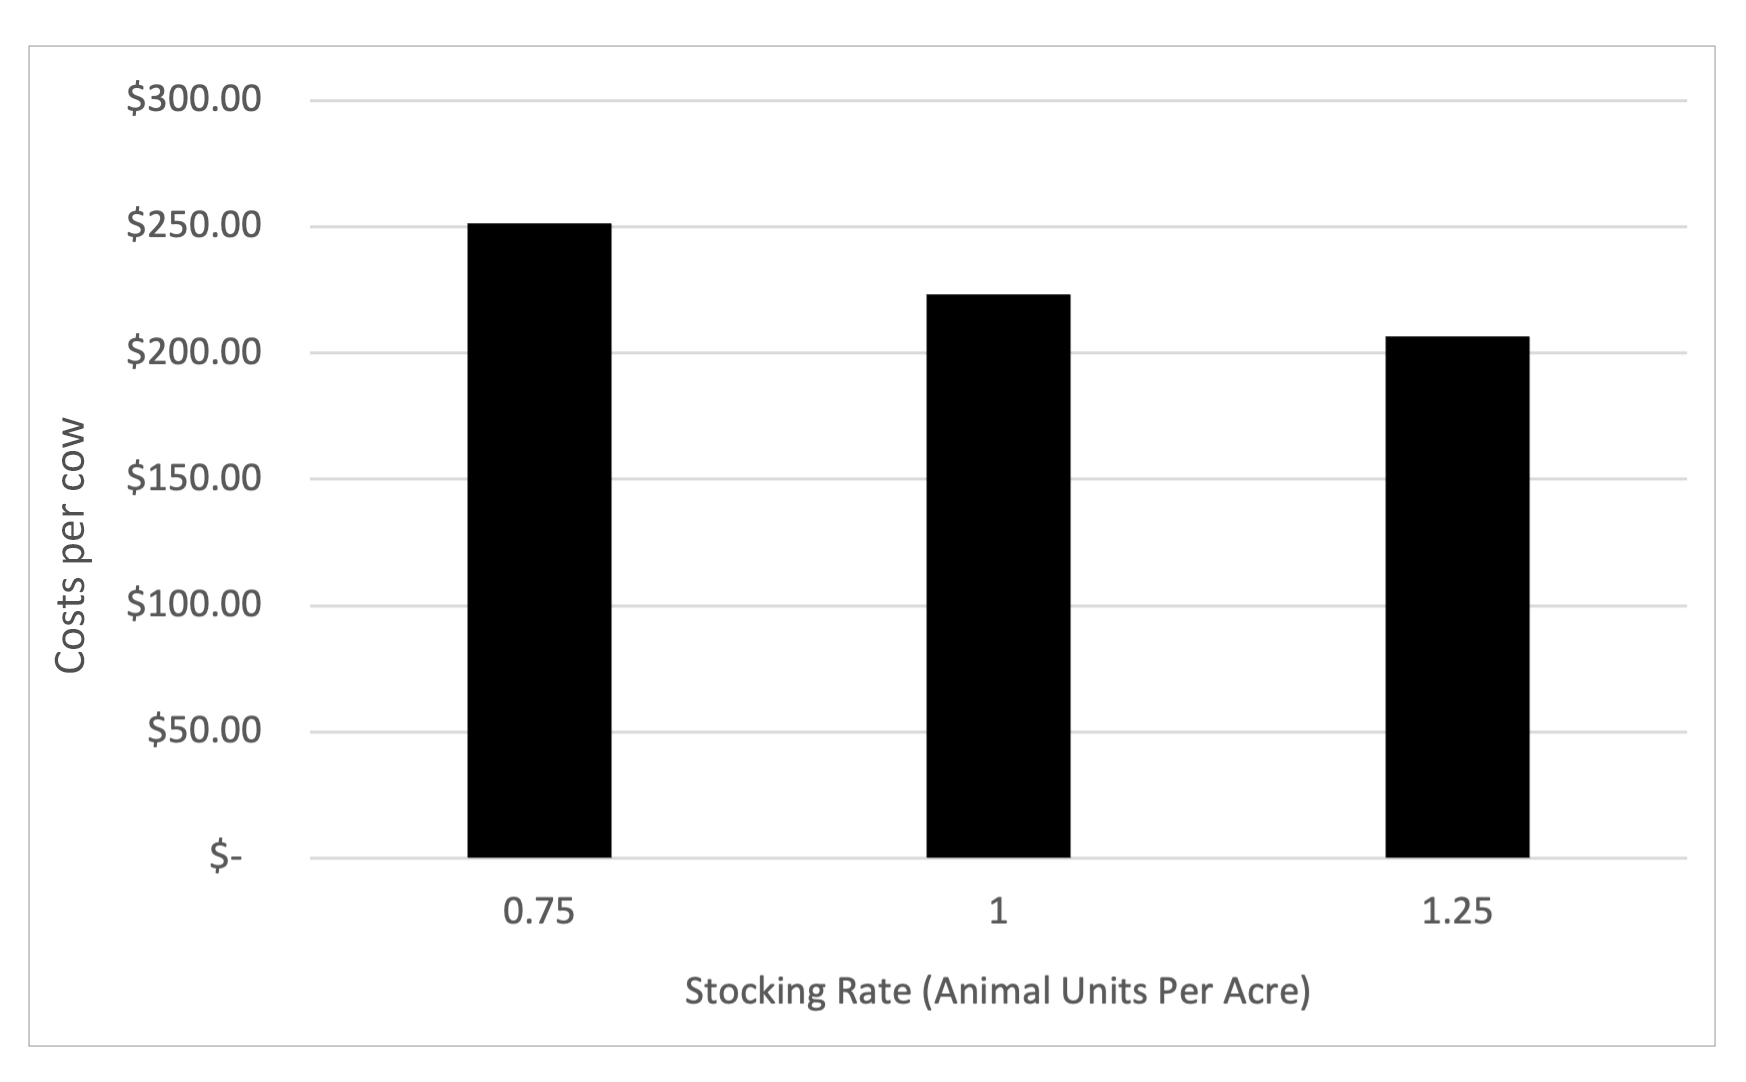 Estimated forage costs per cow per year for bahiagrass at various stocking rates.